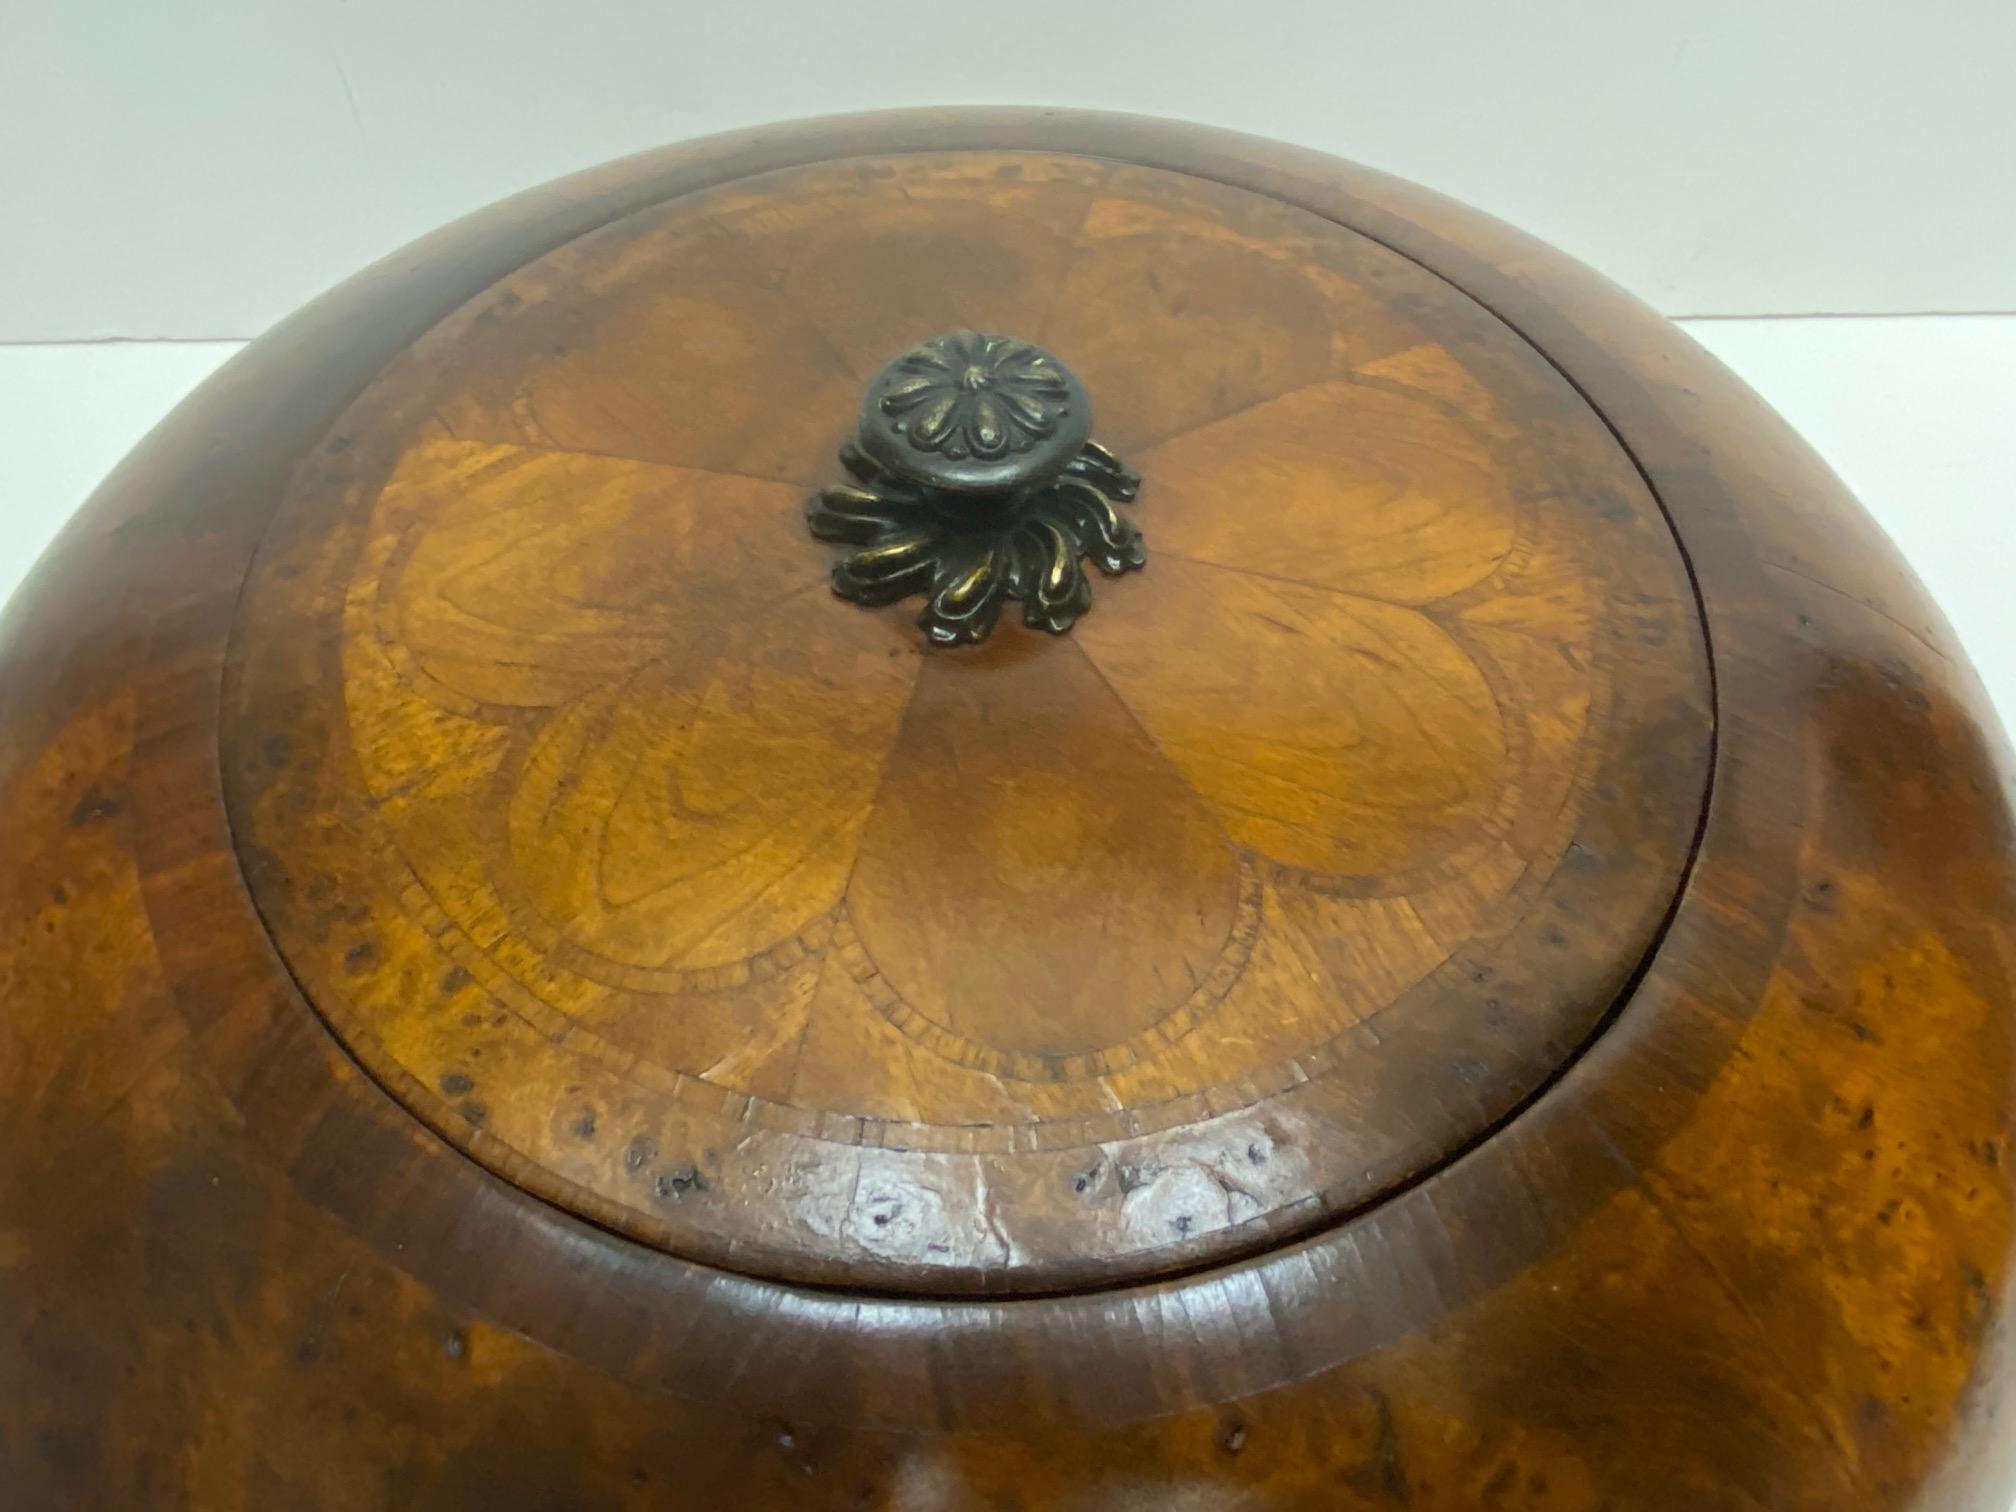 Philippine Monumental Beautifully Crafted Rounded Burl Wood Box